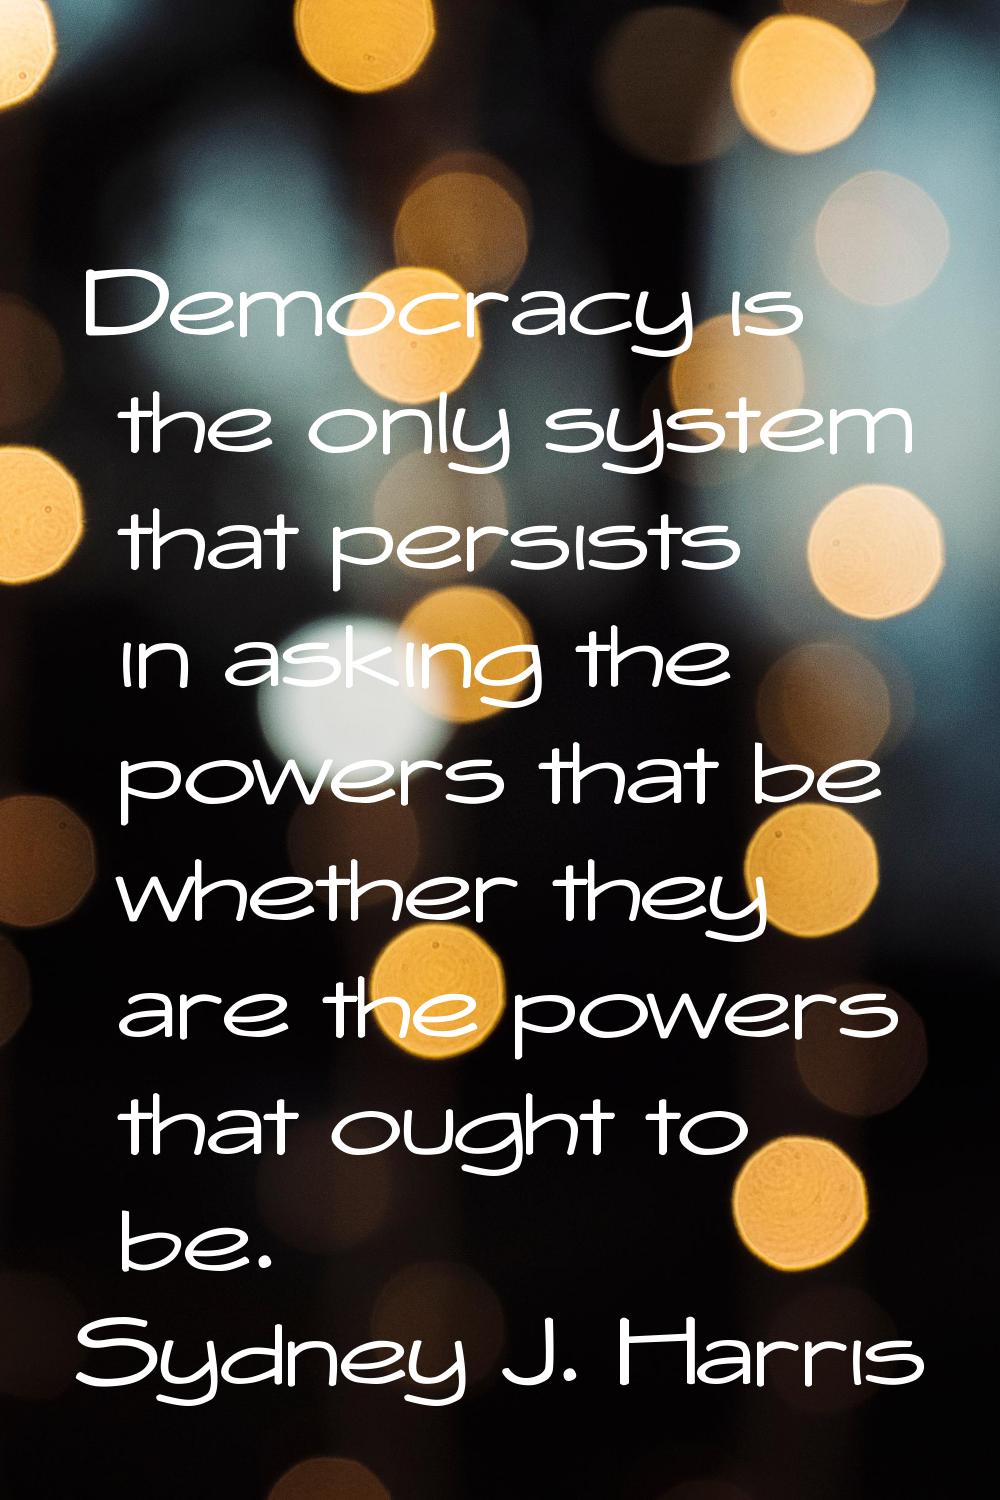 Democracy is the only system that persists in asking the powers that be whether they are the powers